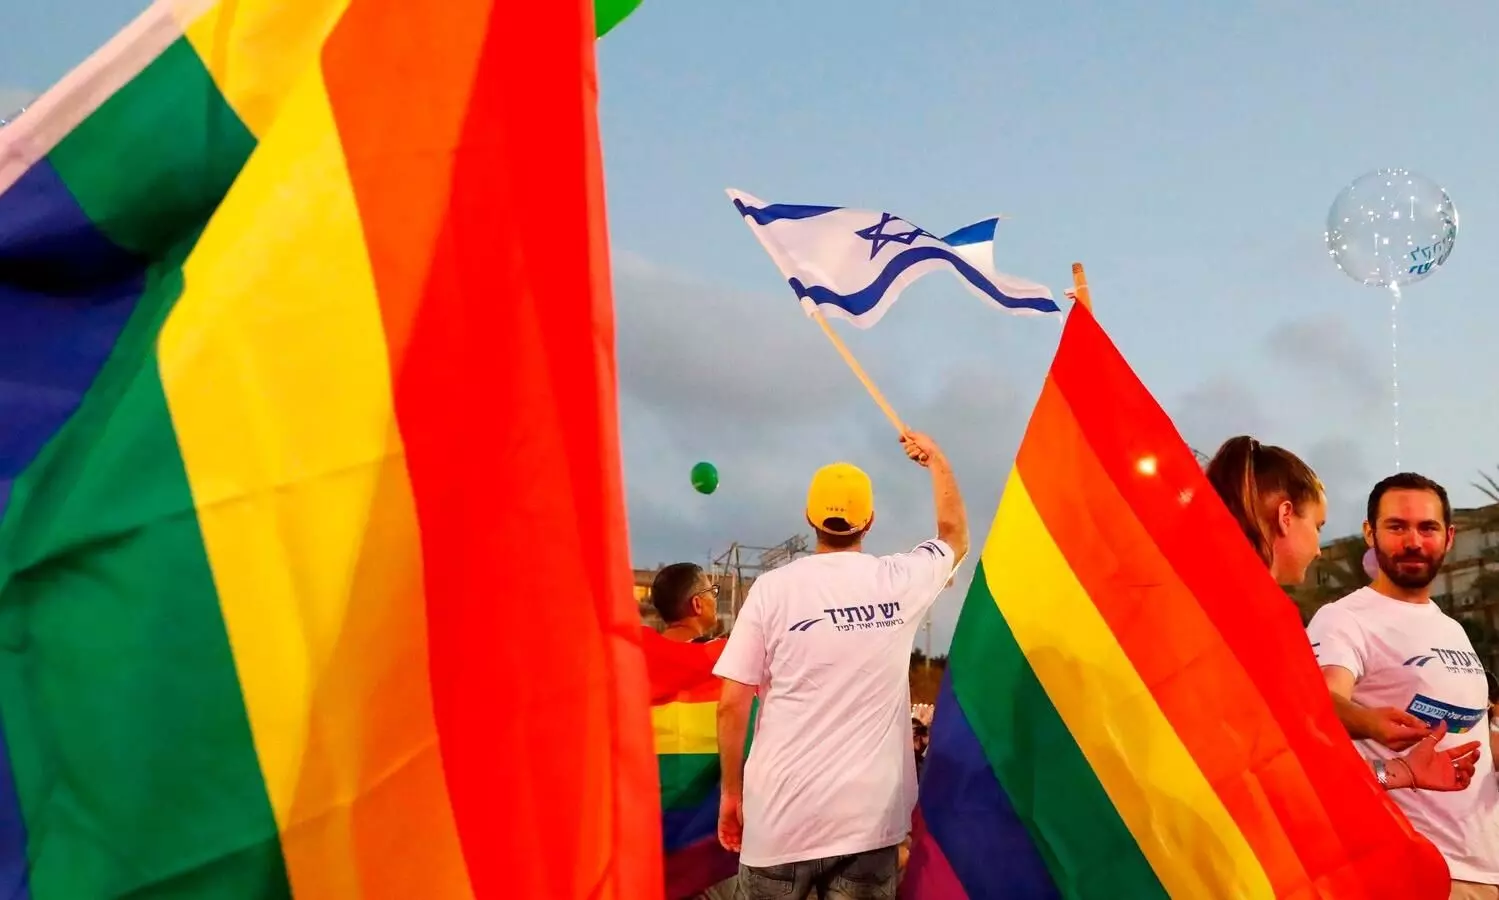 Israel allows gay couples to have children through surrogacy